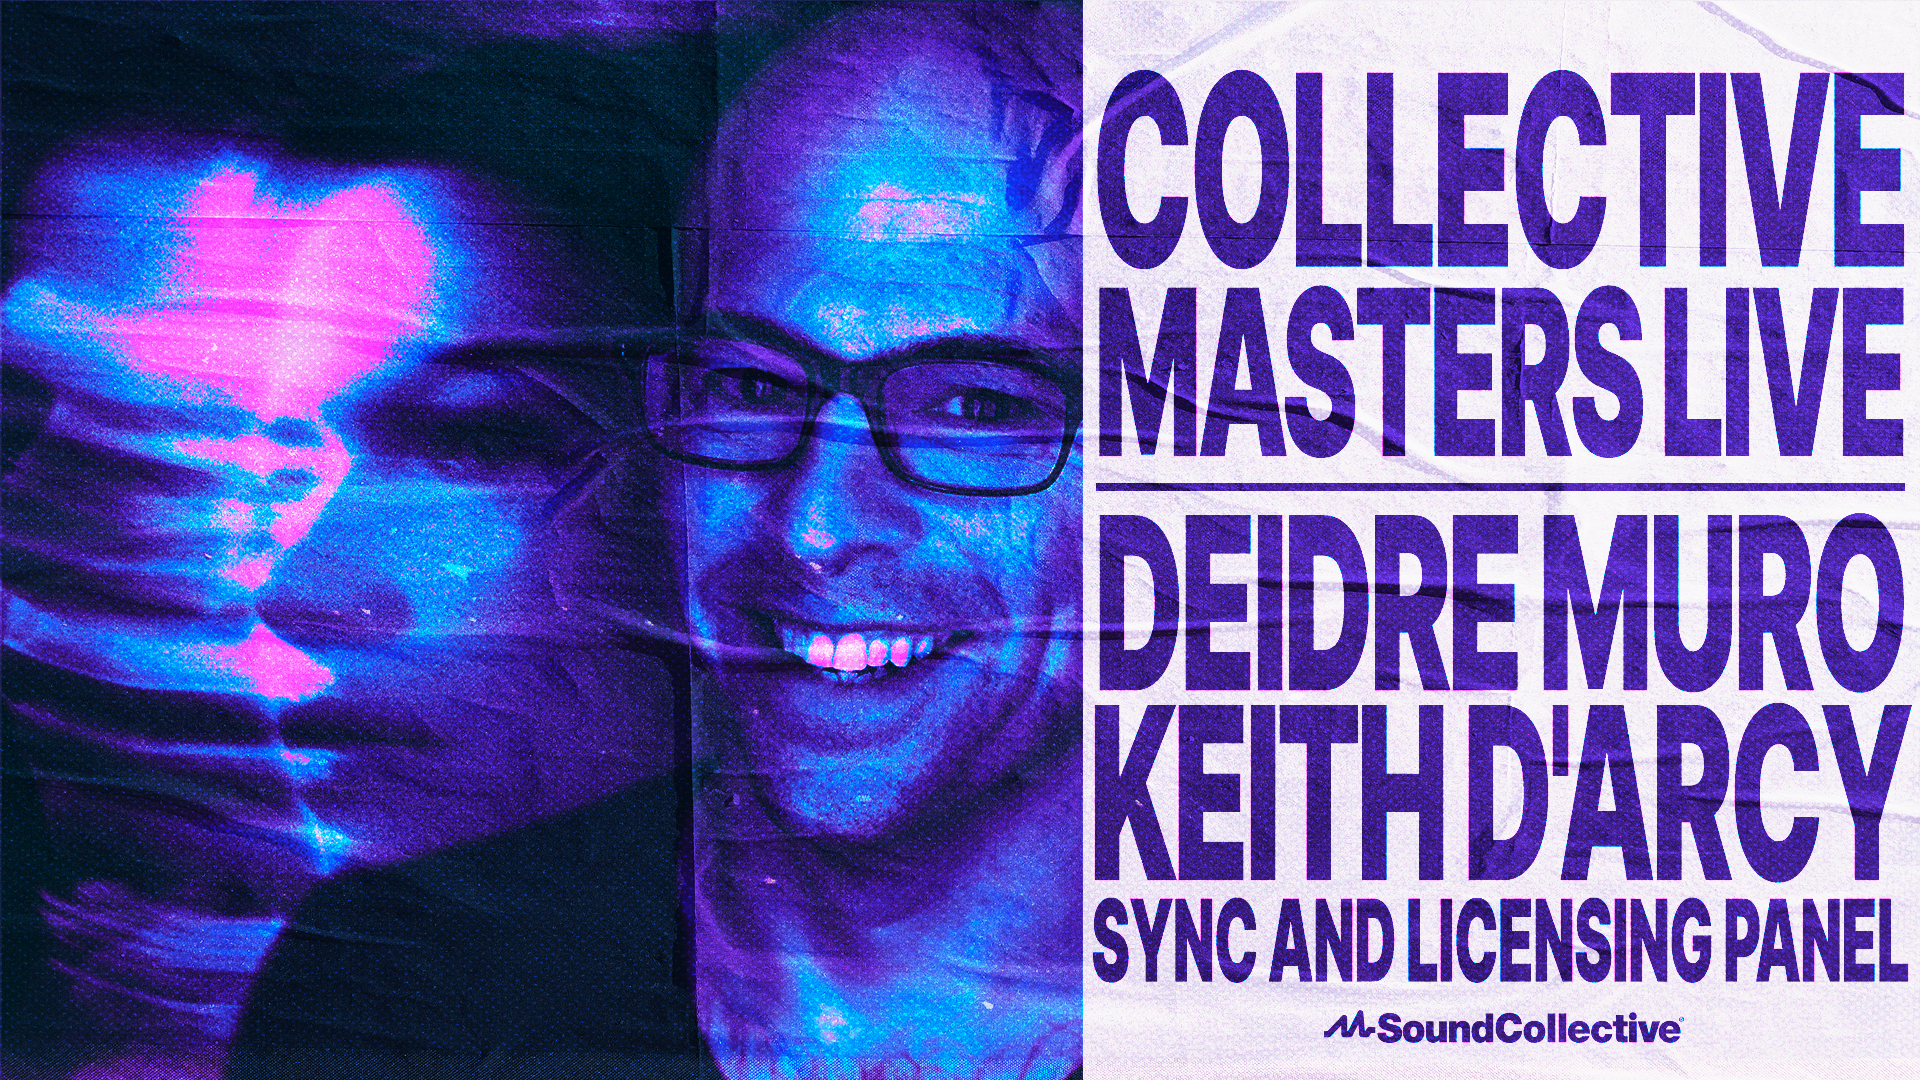 SoundCollective,Collective Masters Live,Keith D'Arcy,Deidre Muro, Collective Masters Live: Deidre Muro &#038; Keith D&#8217;Arcy on Sync and Licensing, SoundCollective